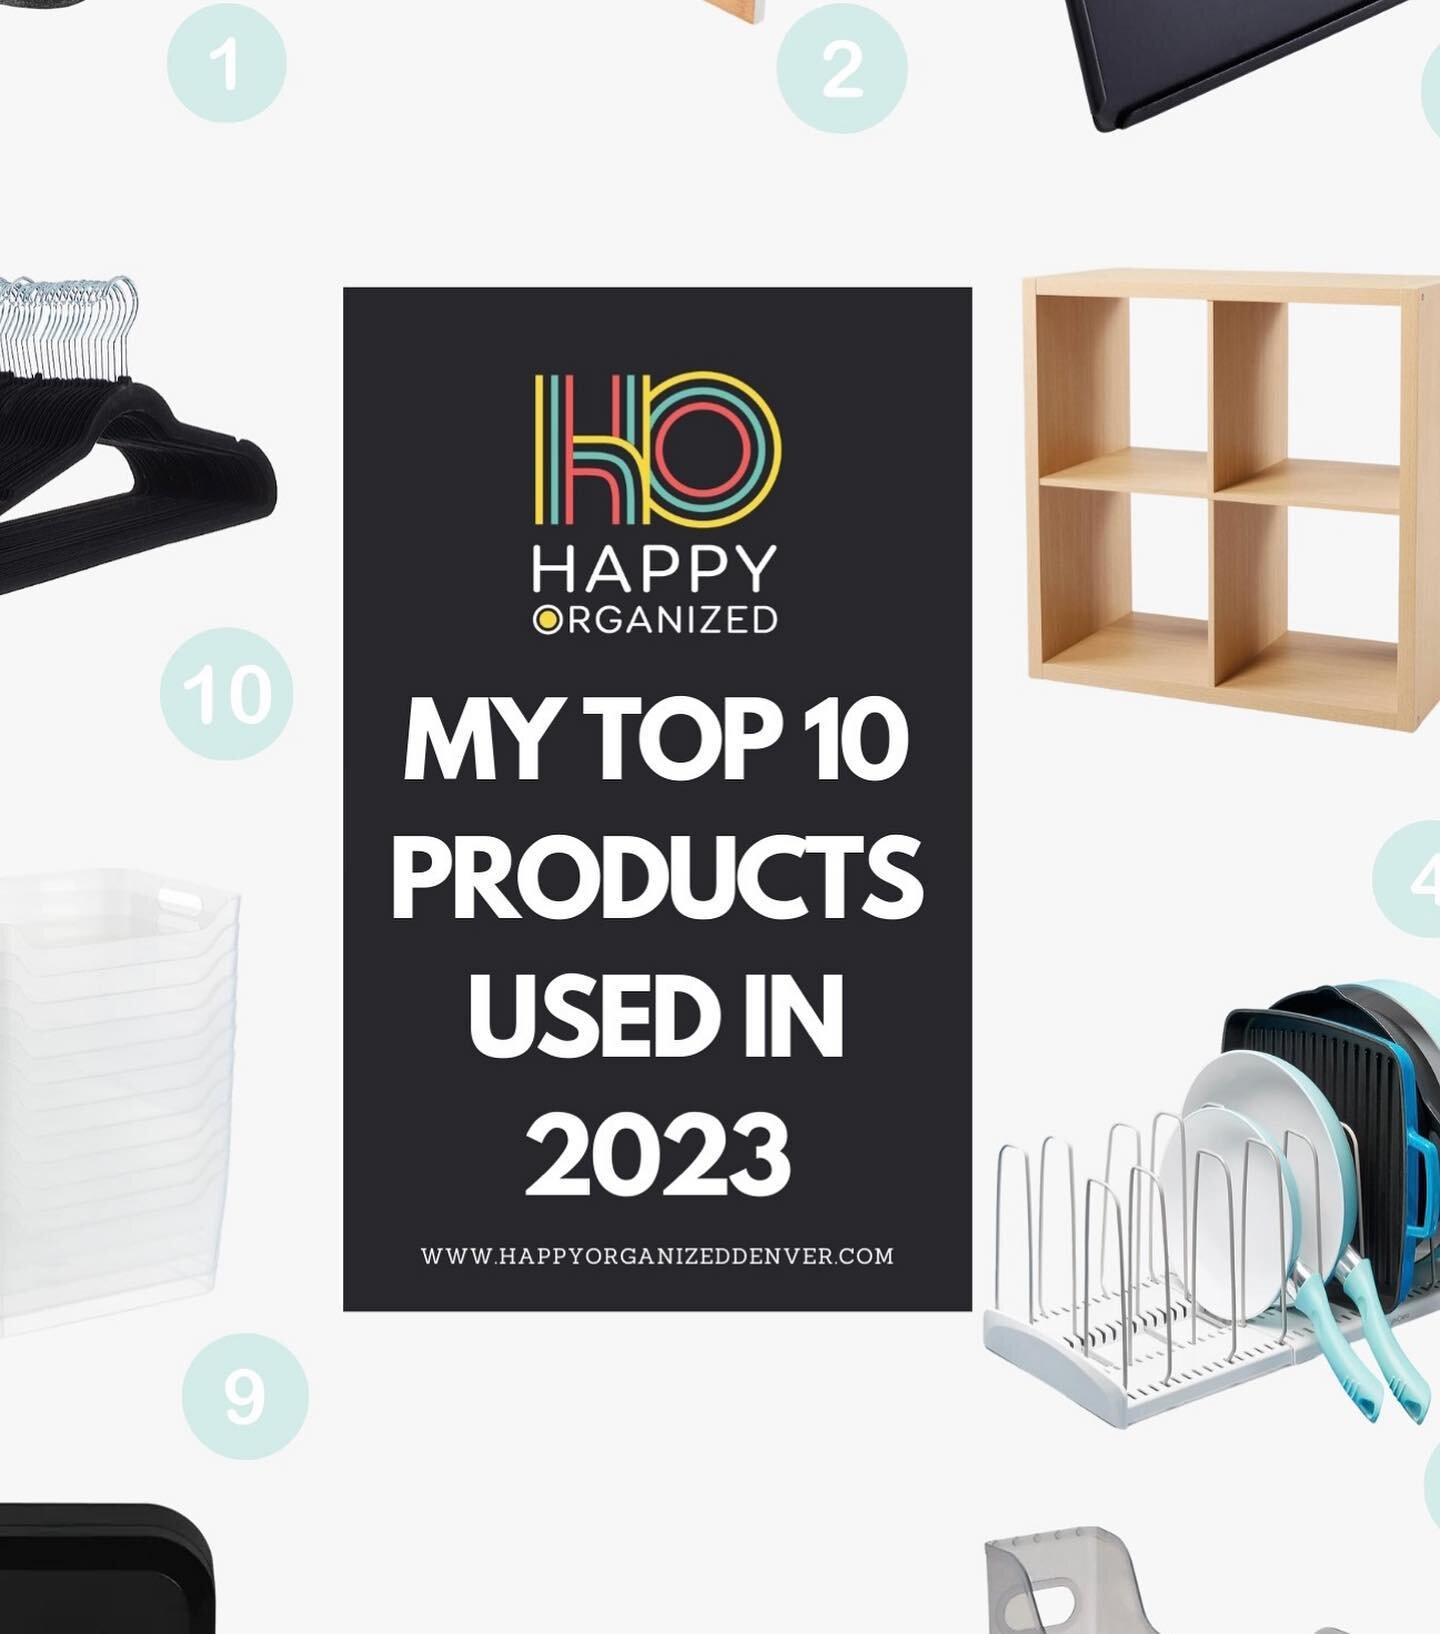 You all asked, so here it is! 
My top 10 favorite products from 2023.
Go check it out on my blog, link in bio.

There are endless products out there and not all of them will work for you. I use these organizing essentials when I know they will help m